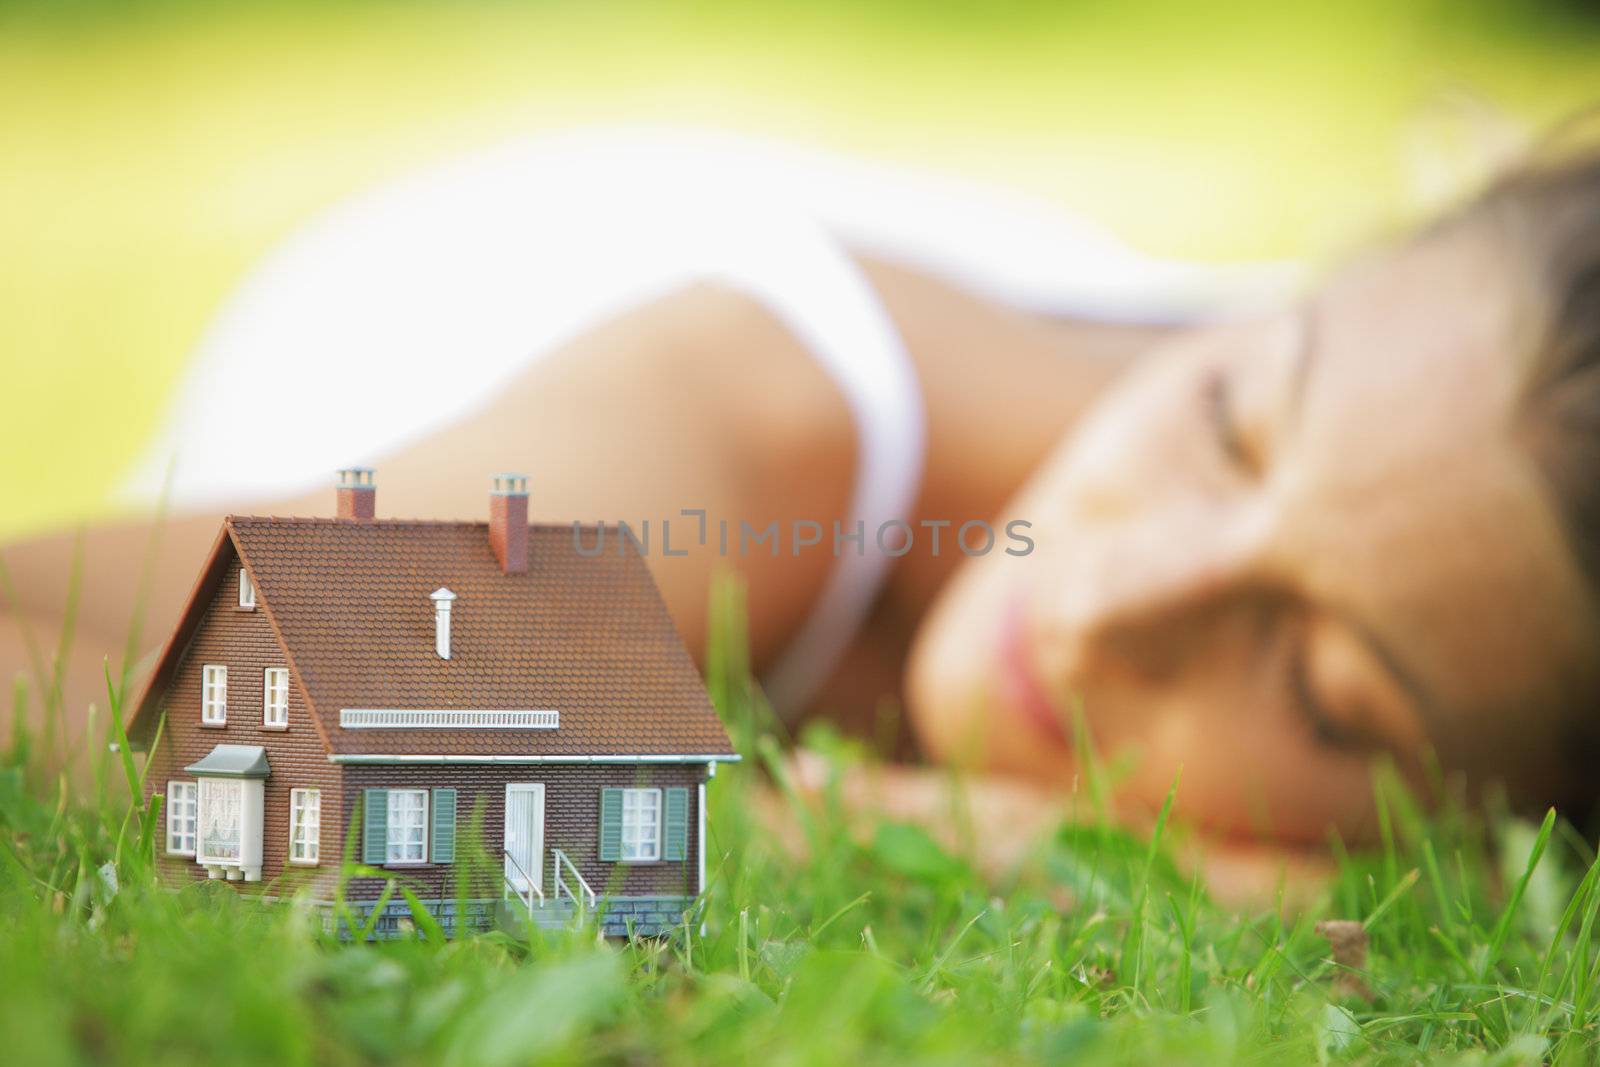 Young woman on a lawn dreaming of her new home